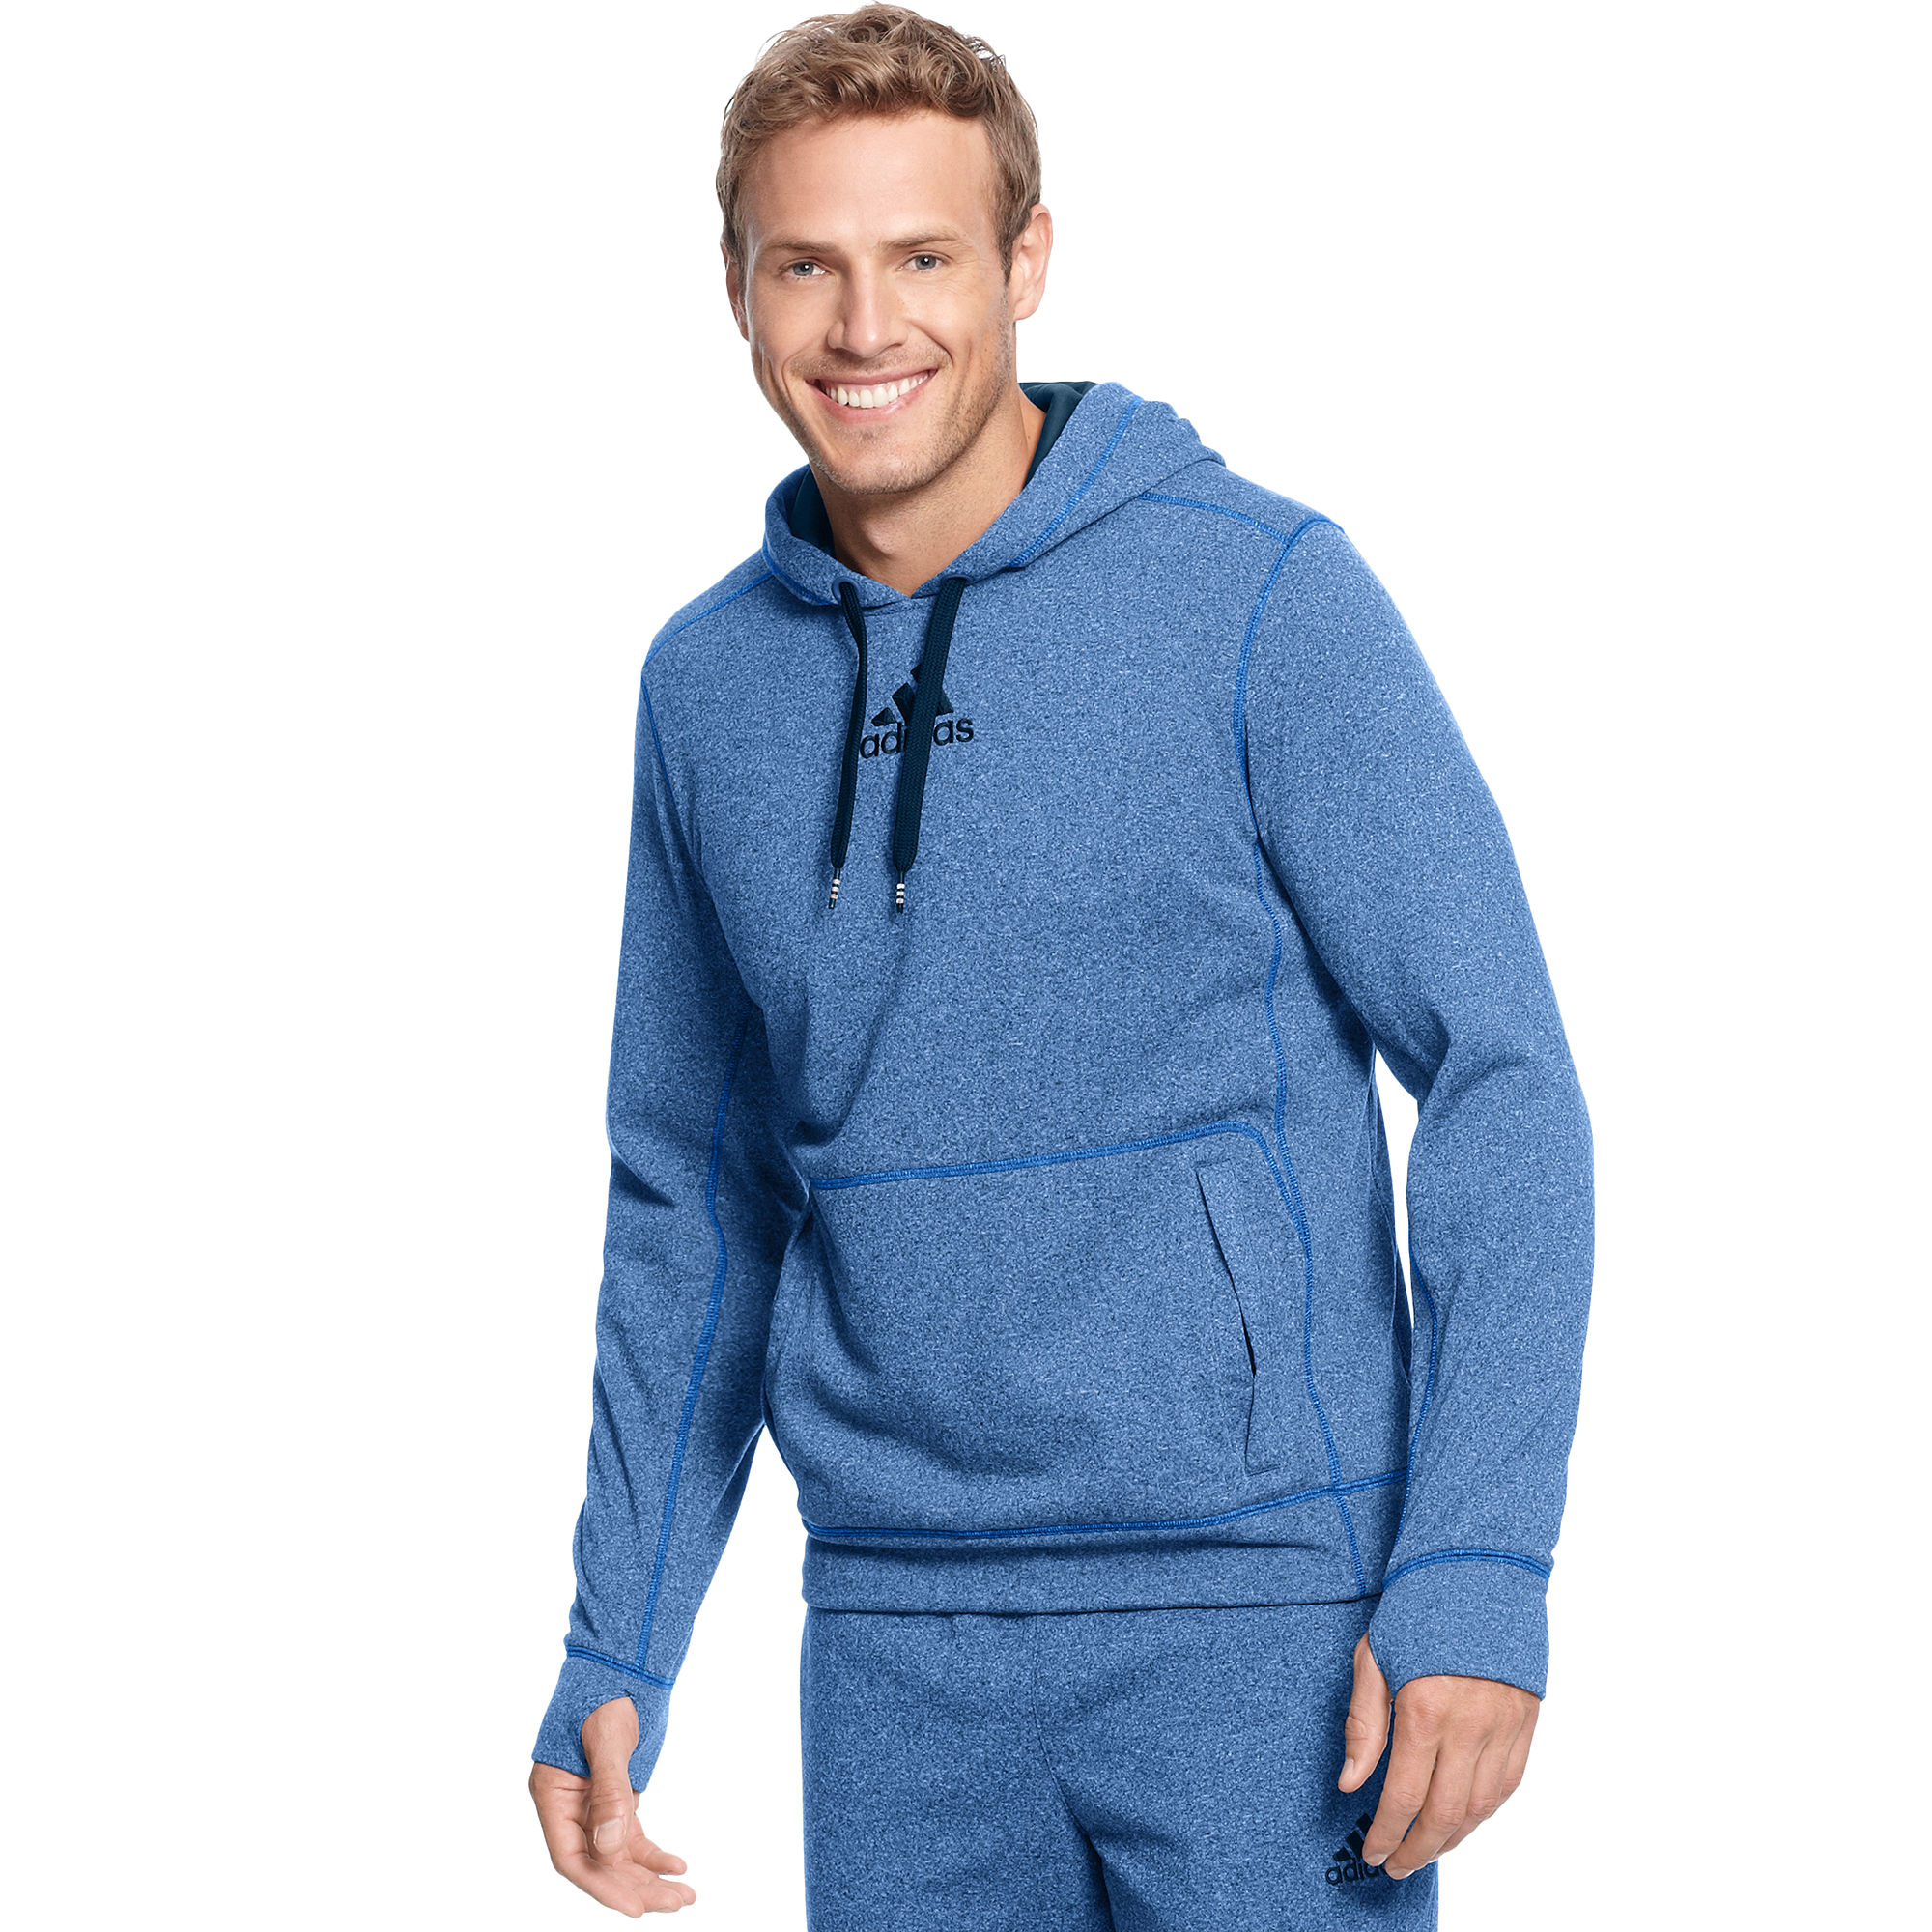 Lyst - Adidas Climawarm Ultimate Tech Fleece Hoodie in Blue for Men